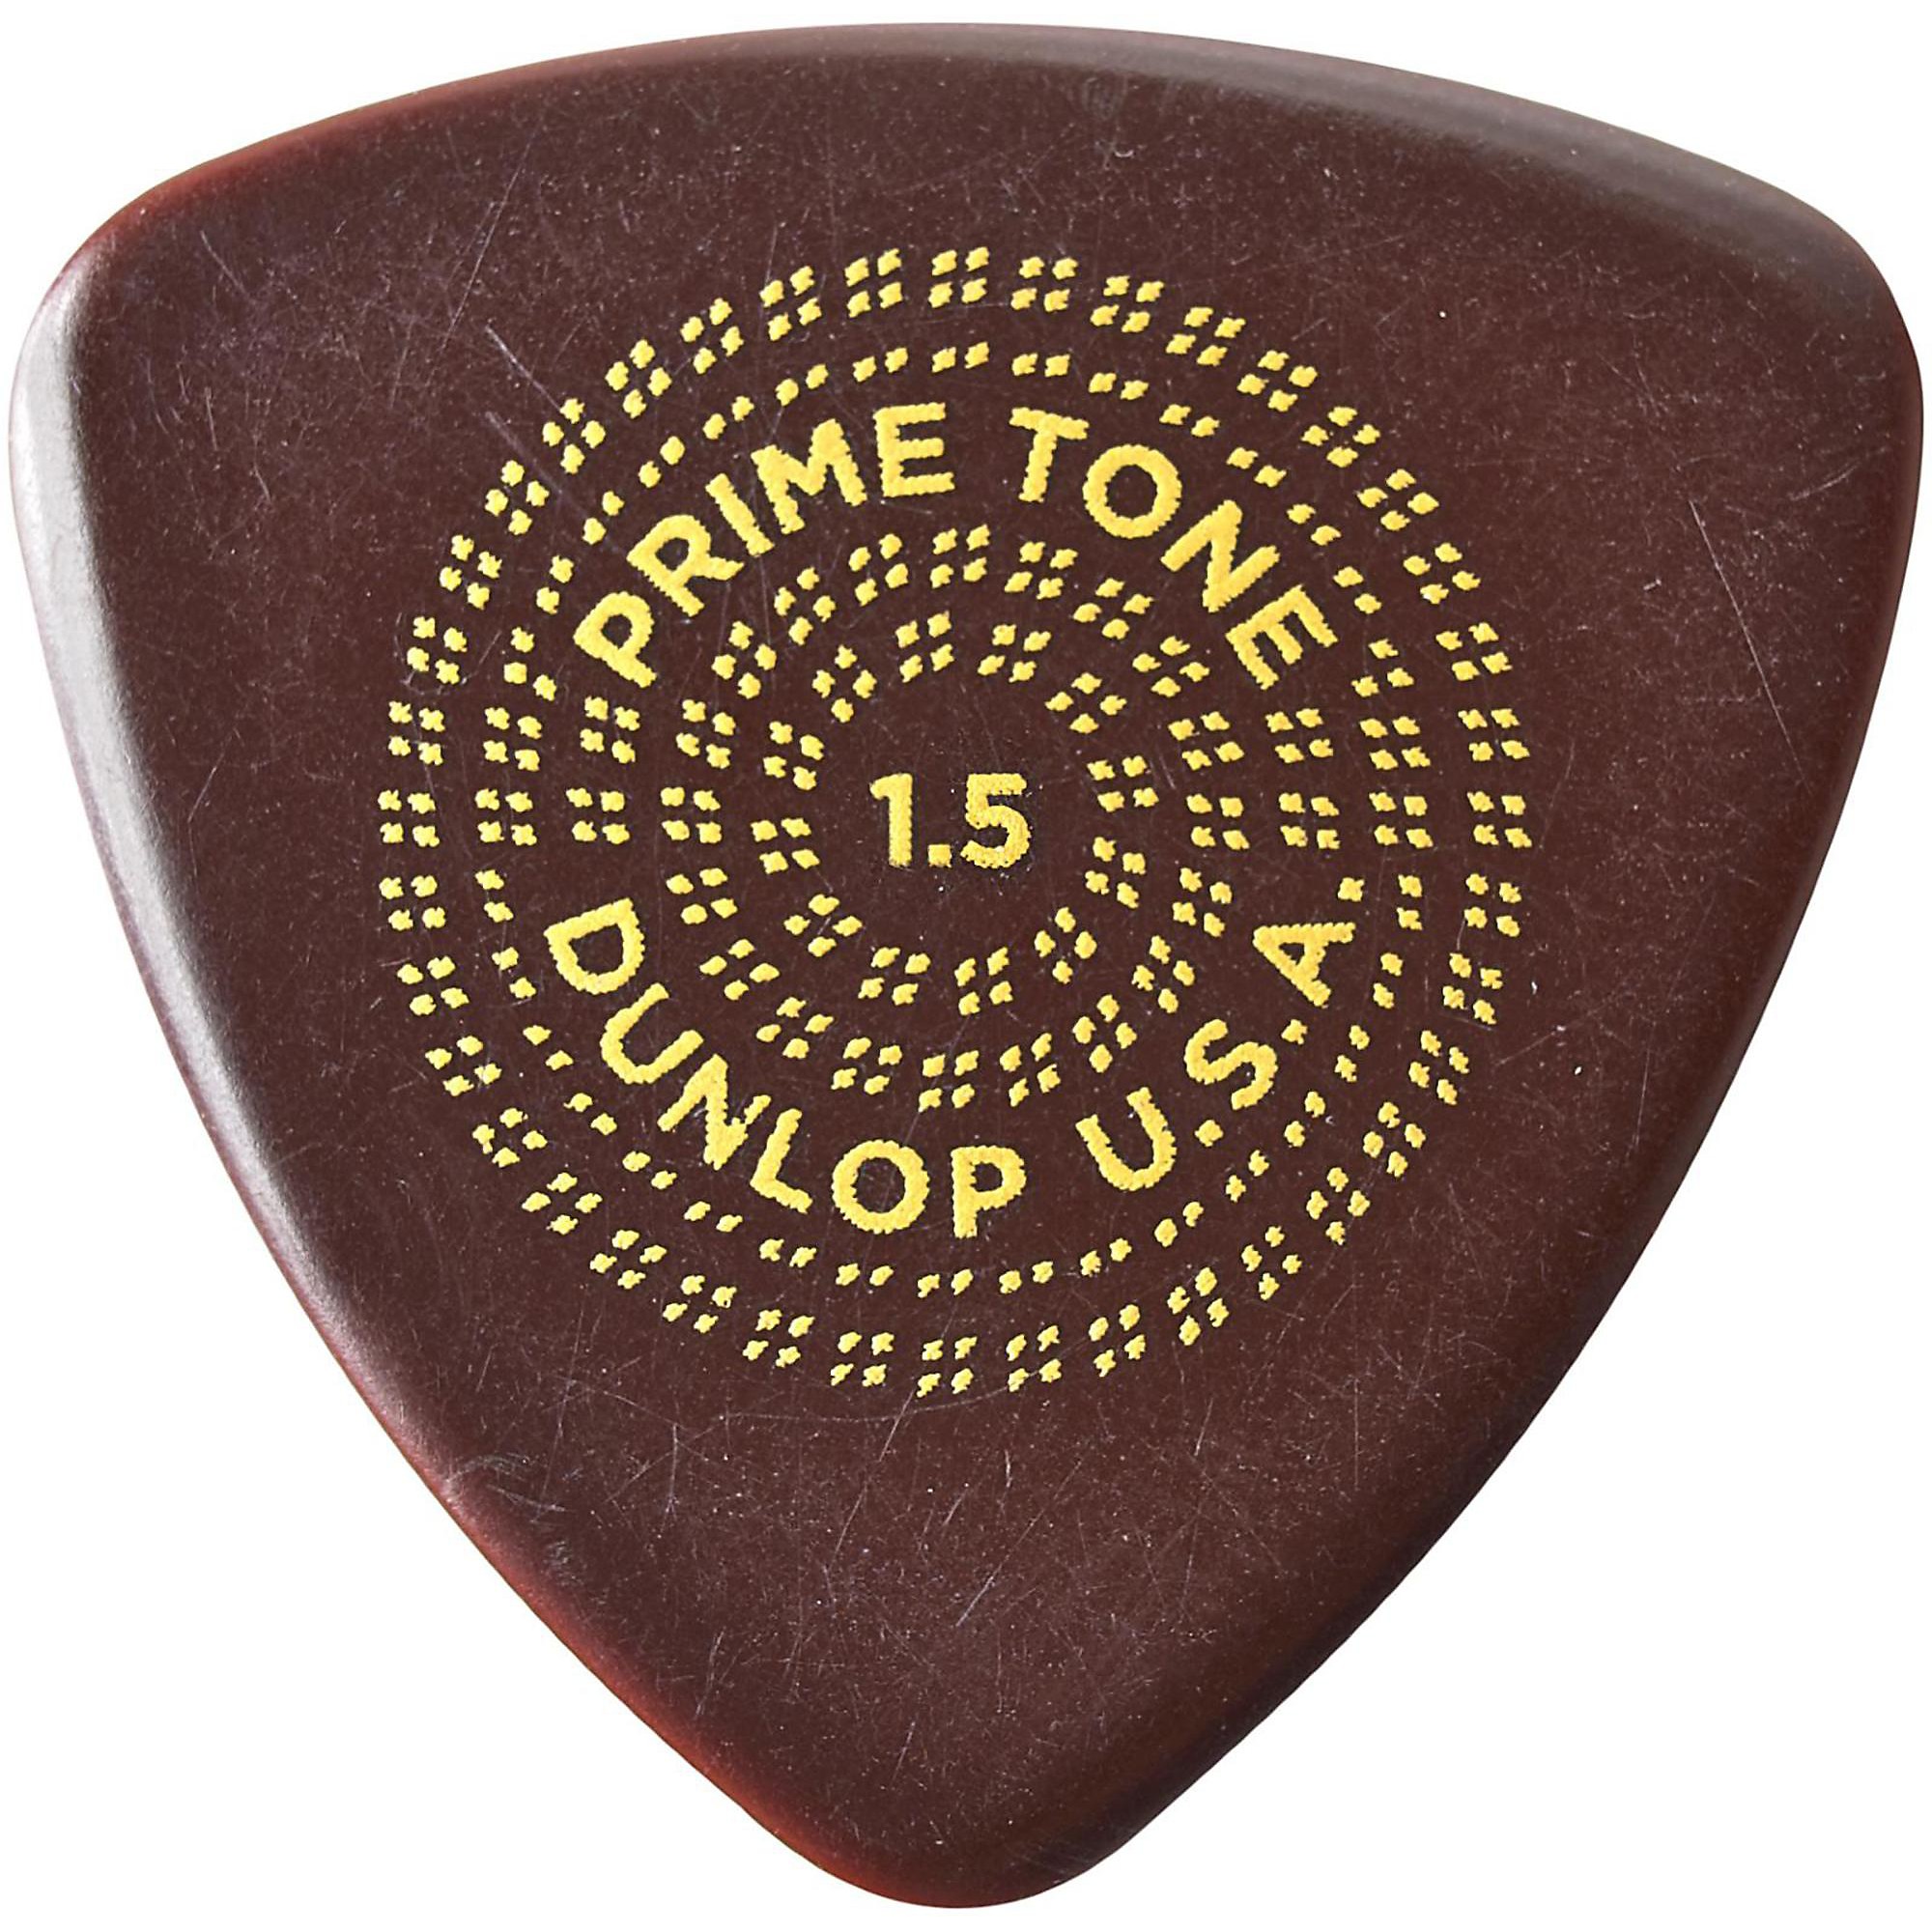 Dunlop Guitar Picks  3 Pack  Primetone Small Tri Hand Sculpted Smooth  1.5mm 